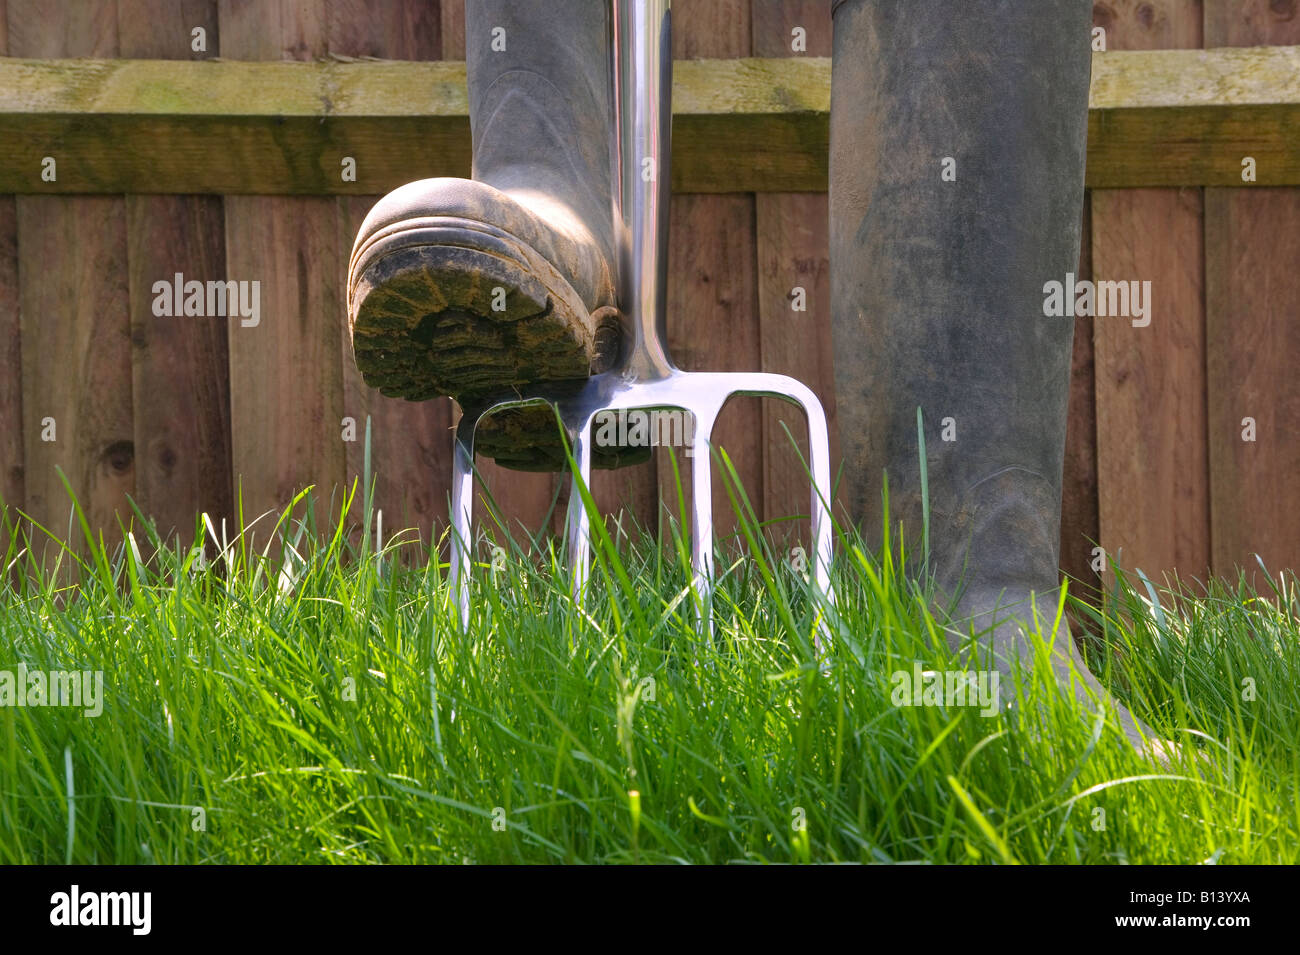 Gardening shot of a fork and wellington boots Stock Photo